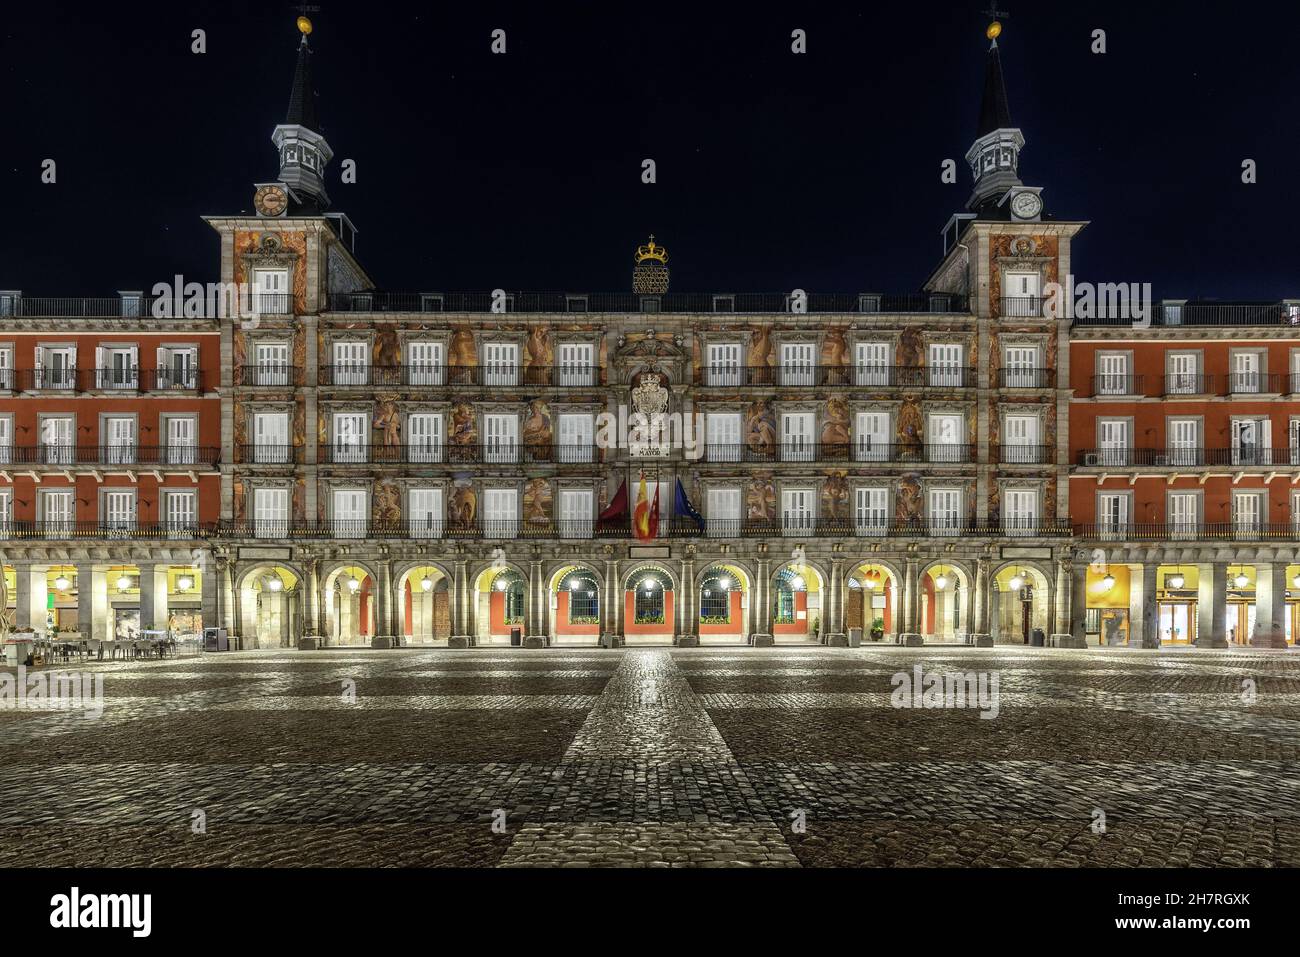 Central square of the city of Madrid with illuminated arcades and cobblestone floor. Stock Photo